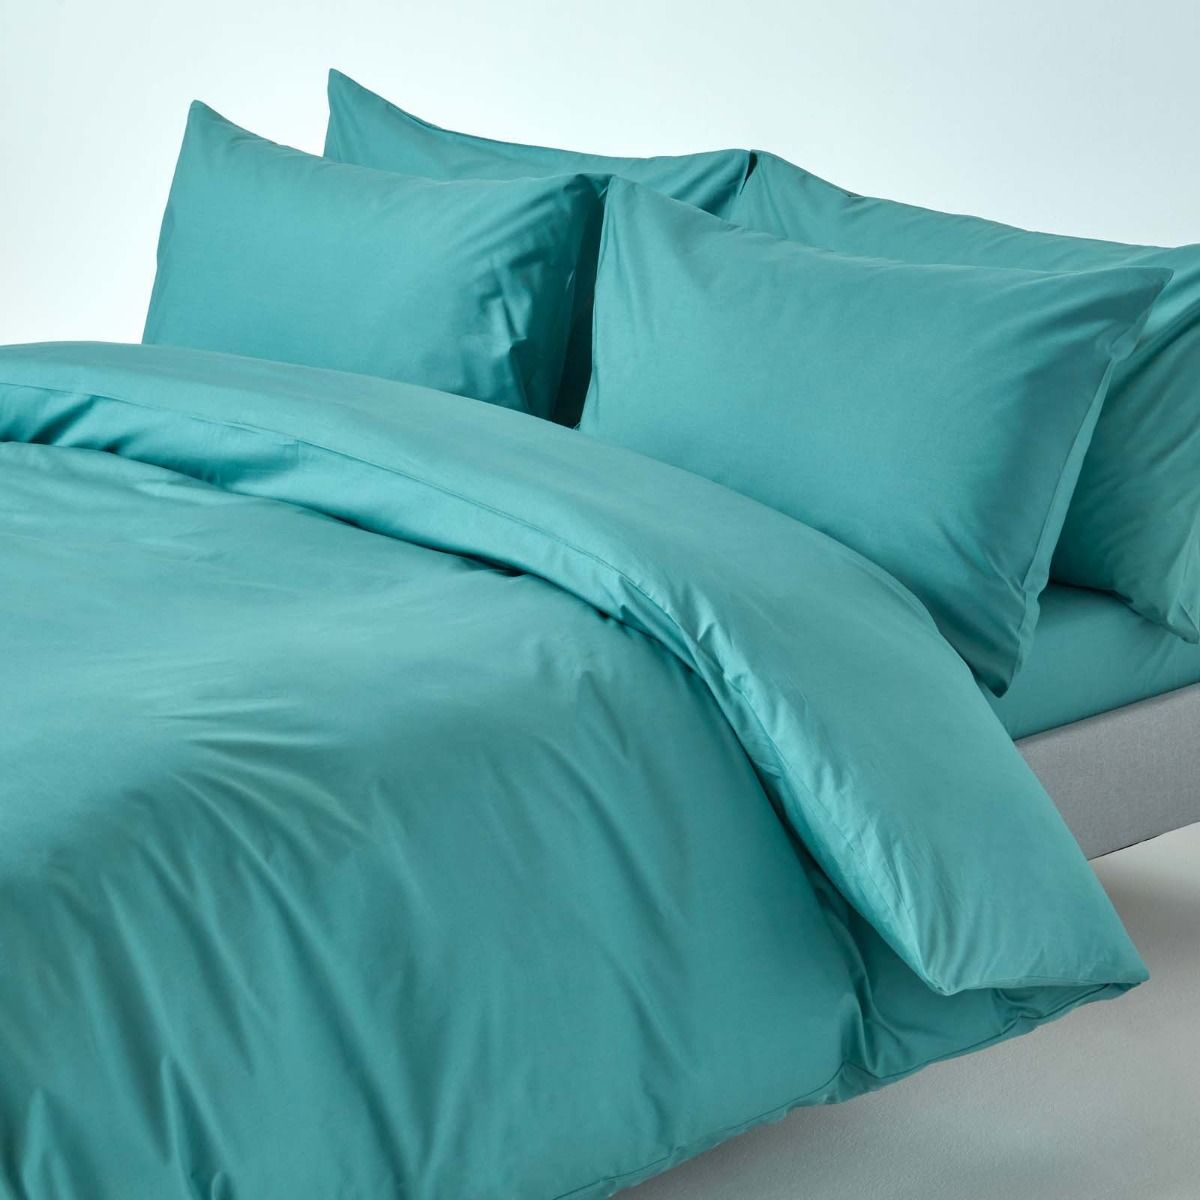 Teal Egyptian Cotton Duvet Cover With, Teal Brushed Cotton Duvet Cover